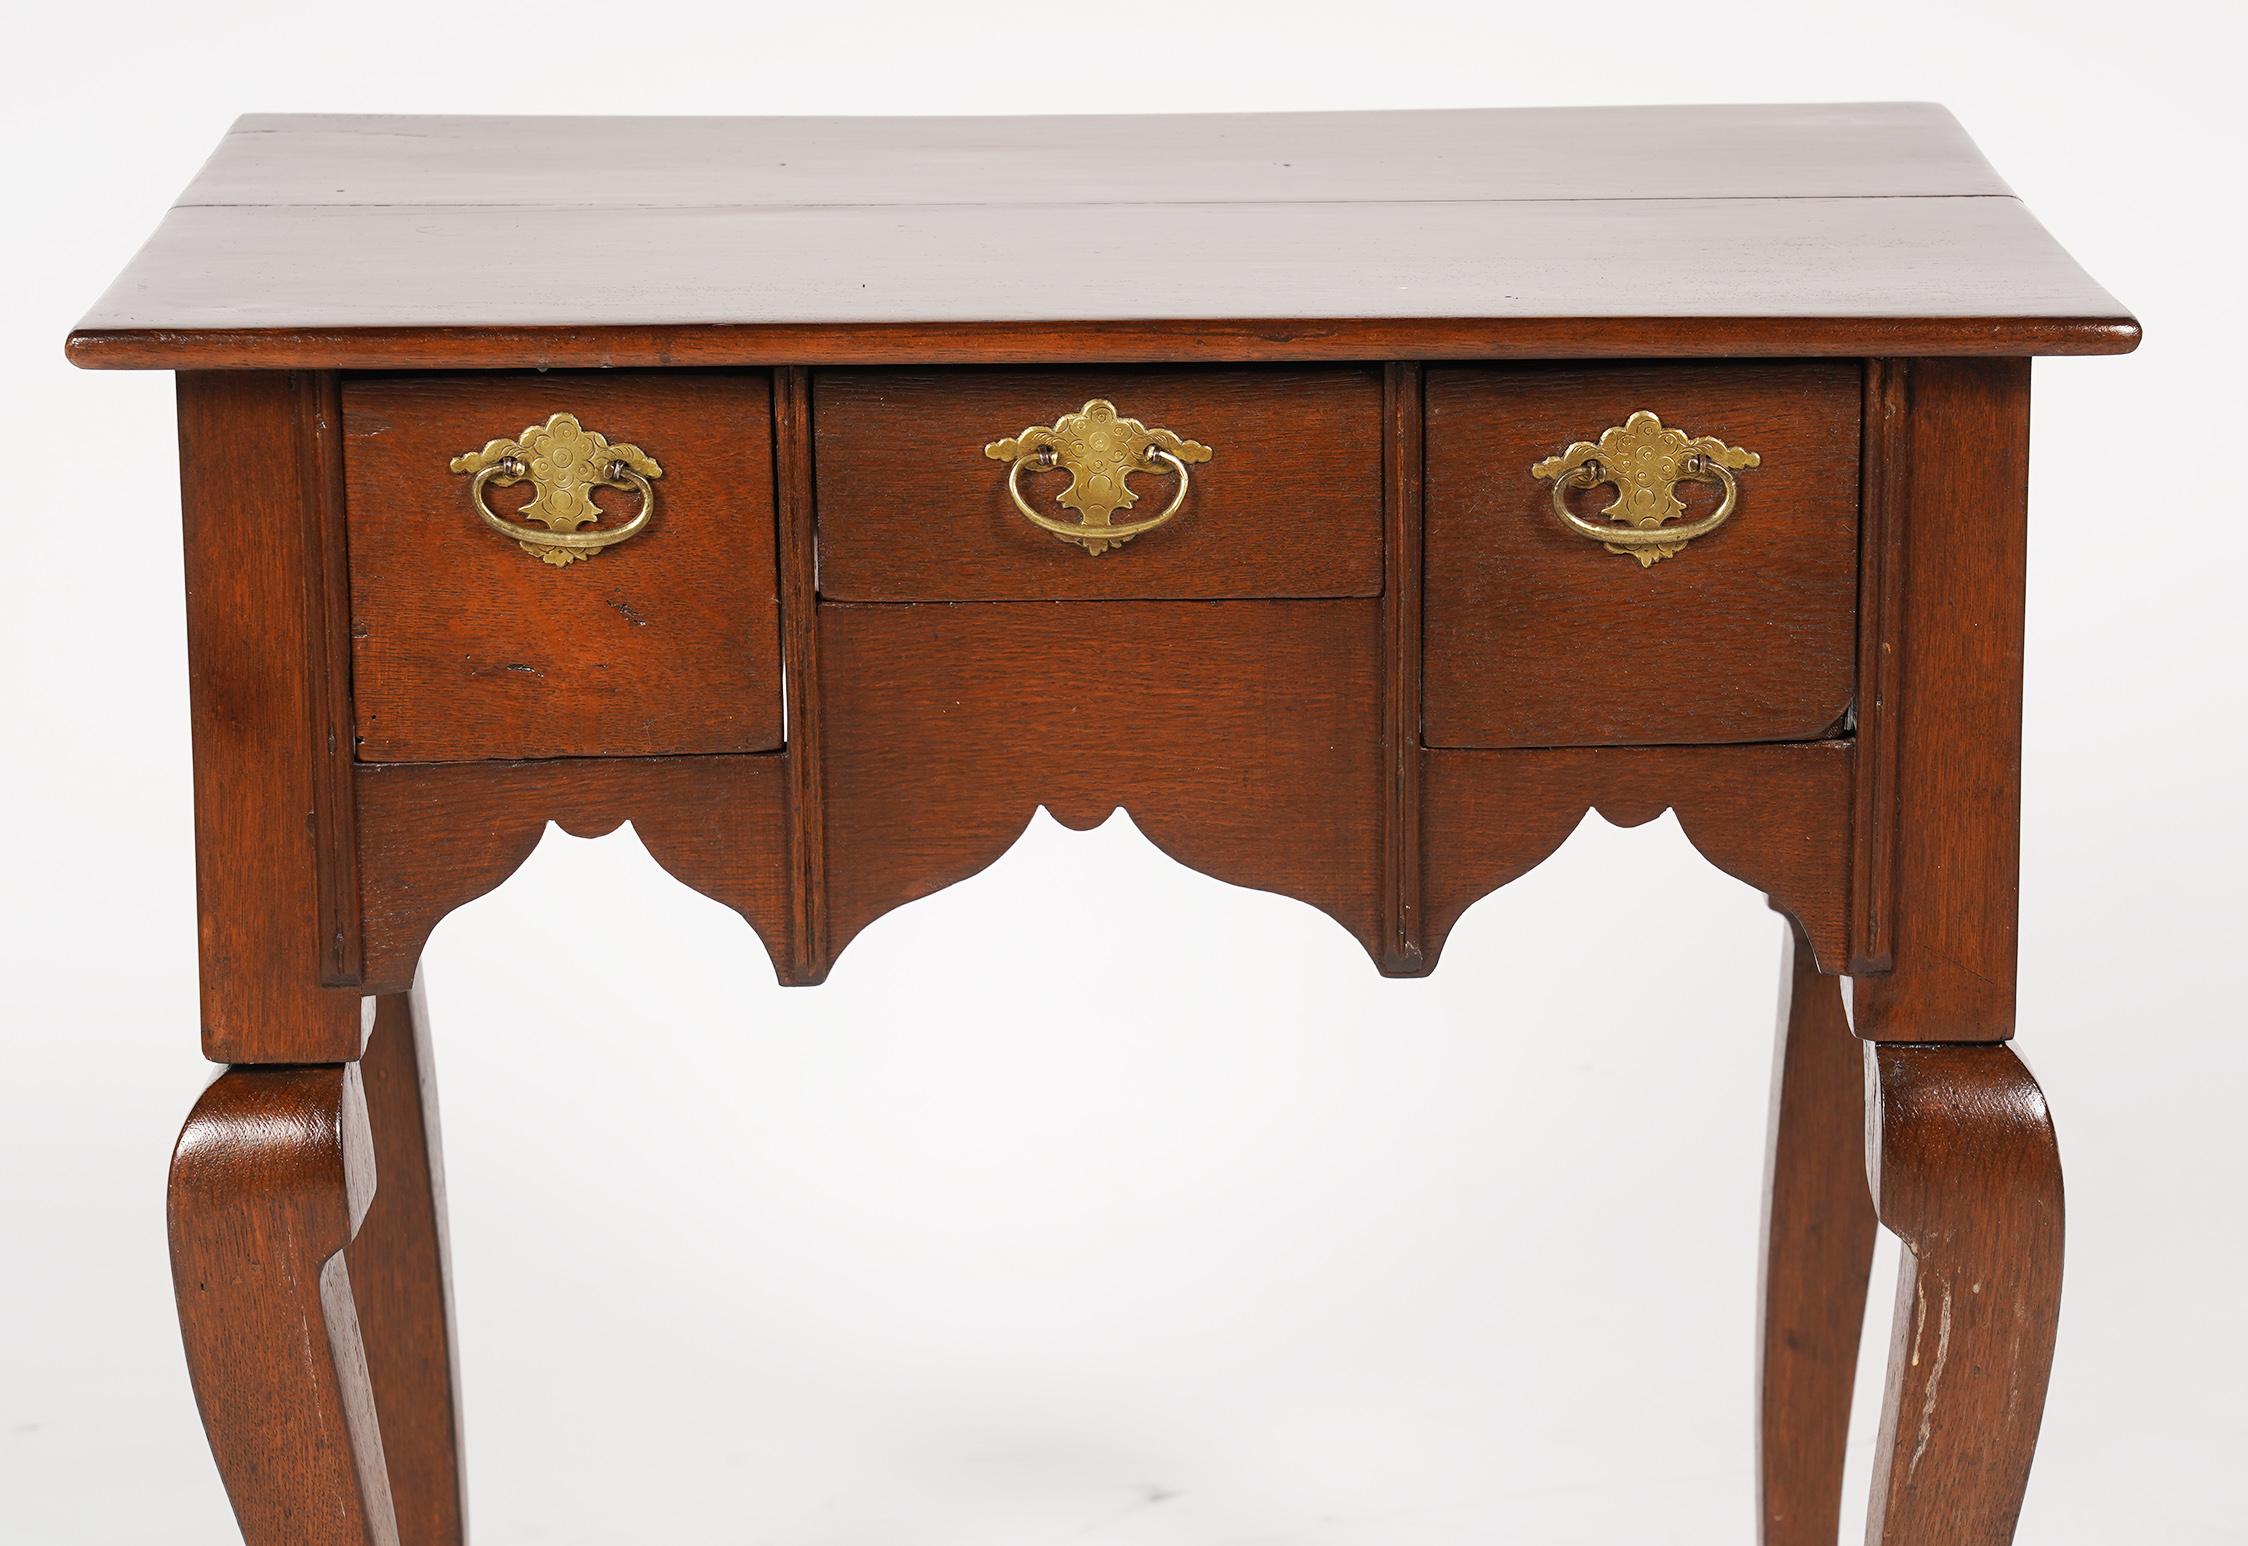 This unusual petite size Queen Anne style carved mahogany lowboy features a polished top above three drawers with original brasses above a three side configured scalloped apron resting on four cabriole legs ending in faceted pad feet, late 18th